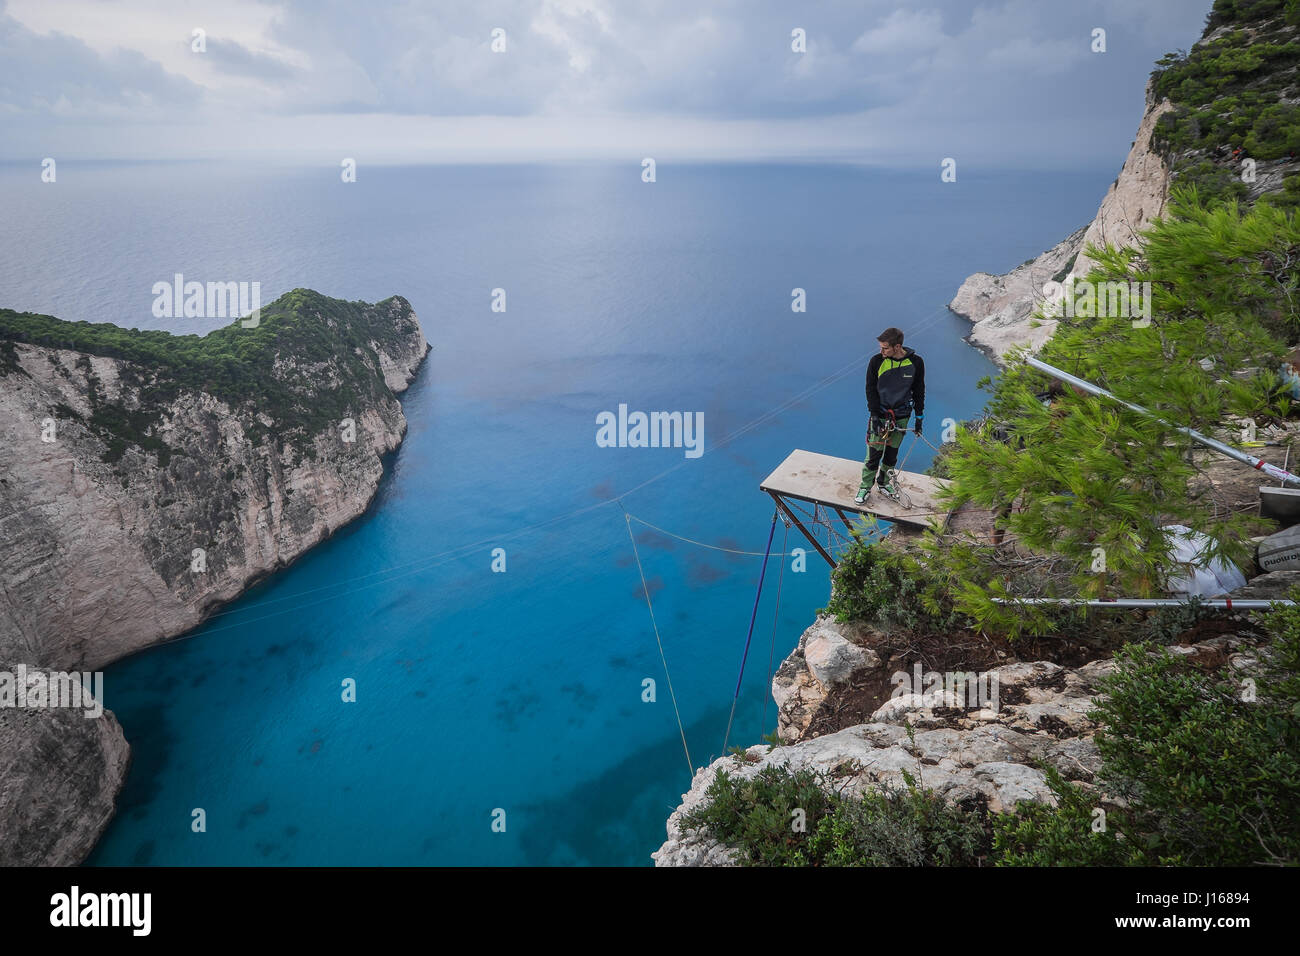 The rope jump world record team holder gave themselves rendez vous in Greece for a new adventure full of adrenaline. It is on the island of Zakynthos  Stock Photo